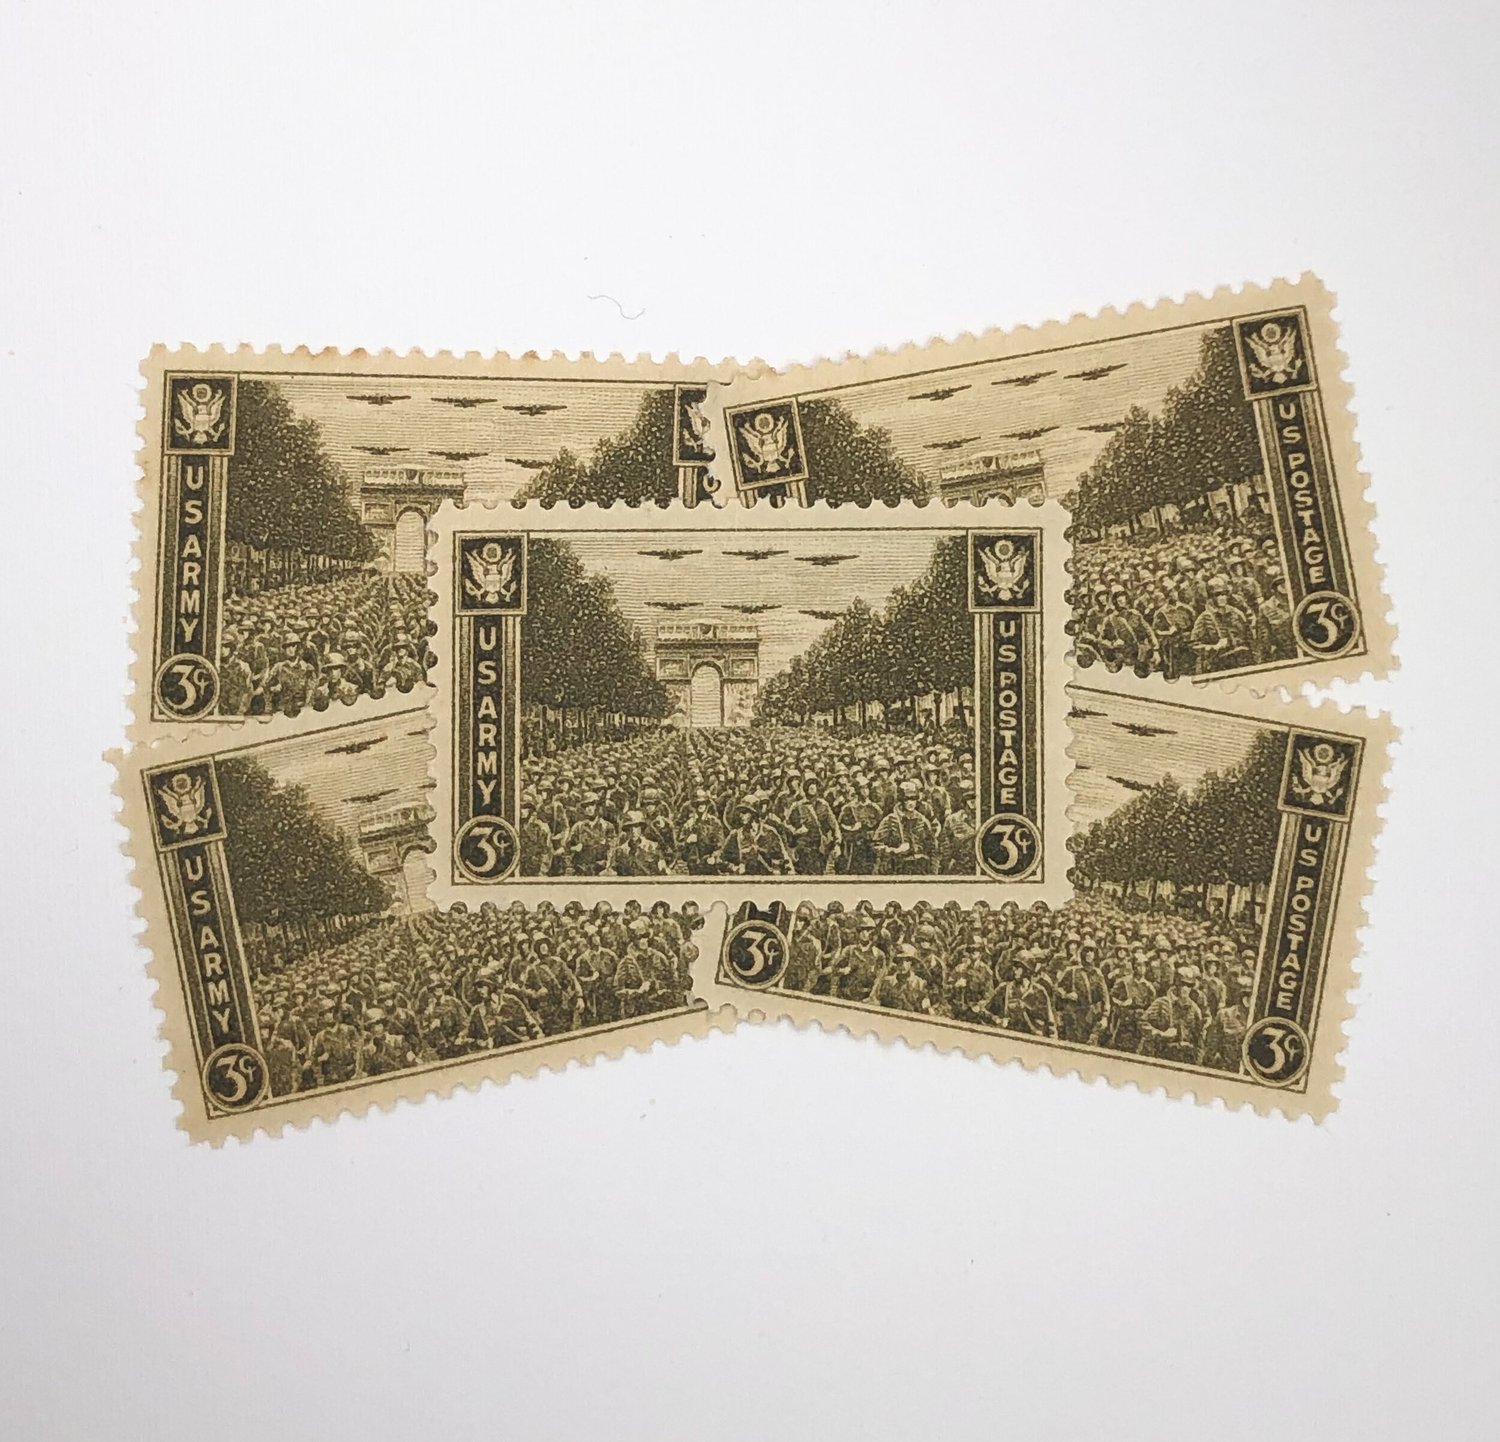 Money Order Stamps / Revenues / Military Post / Bandit Post Stamp